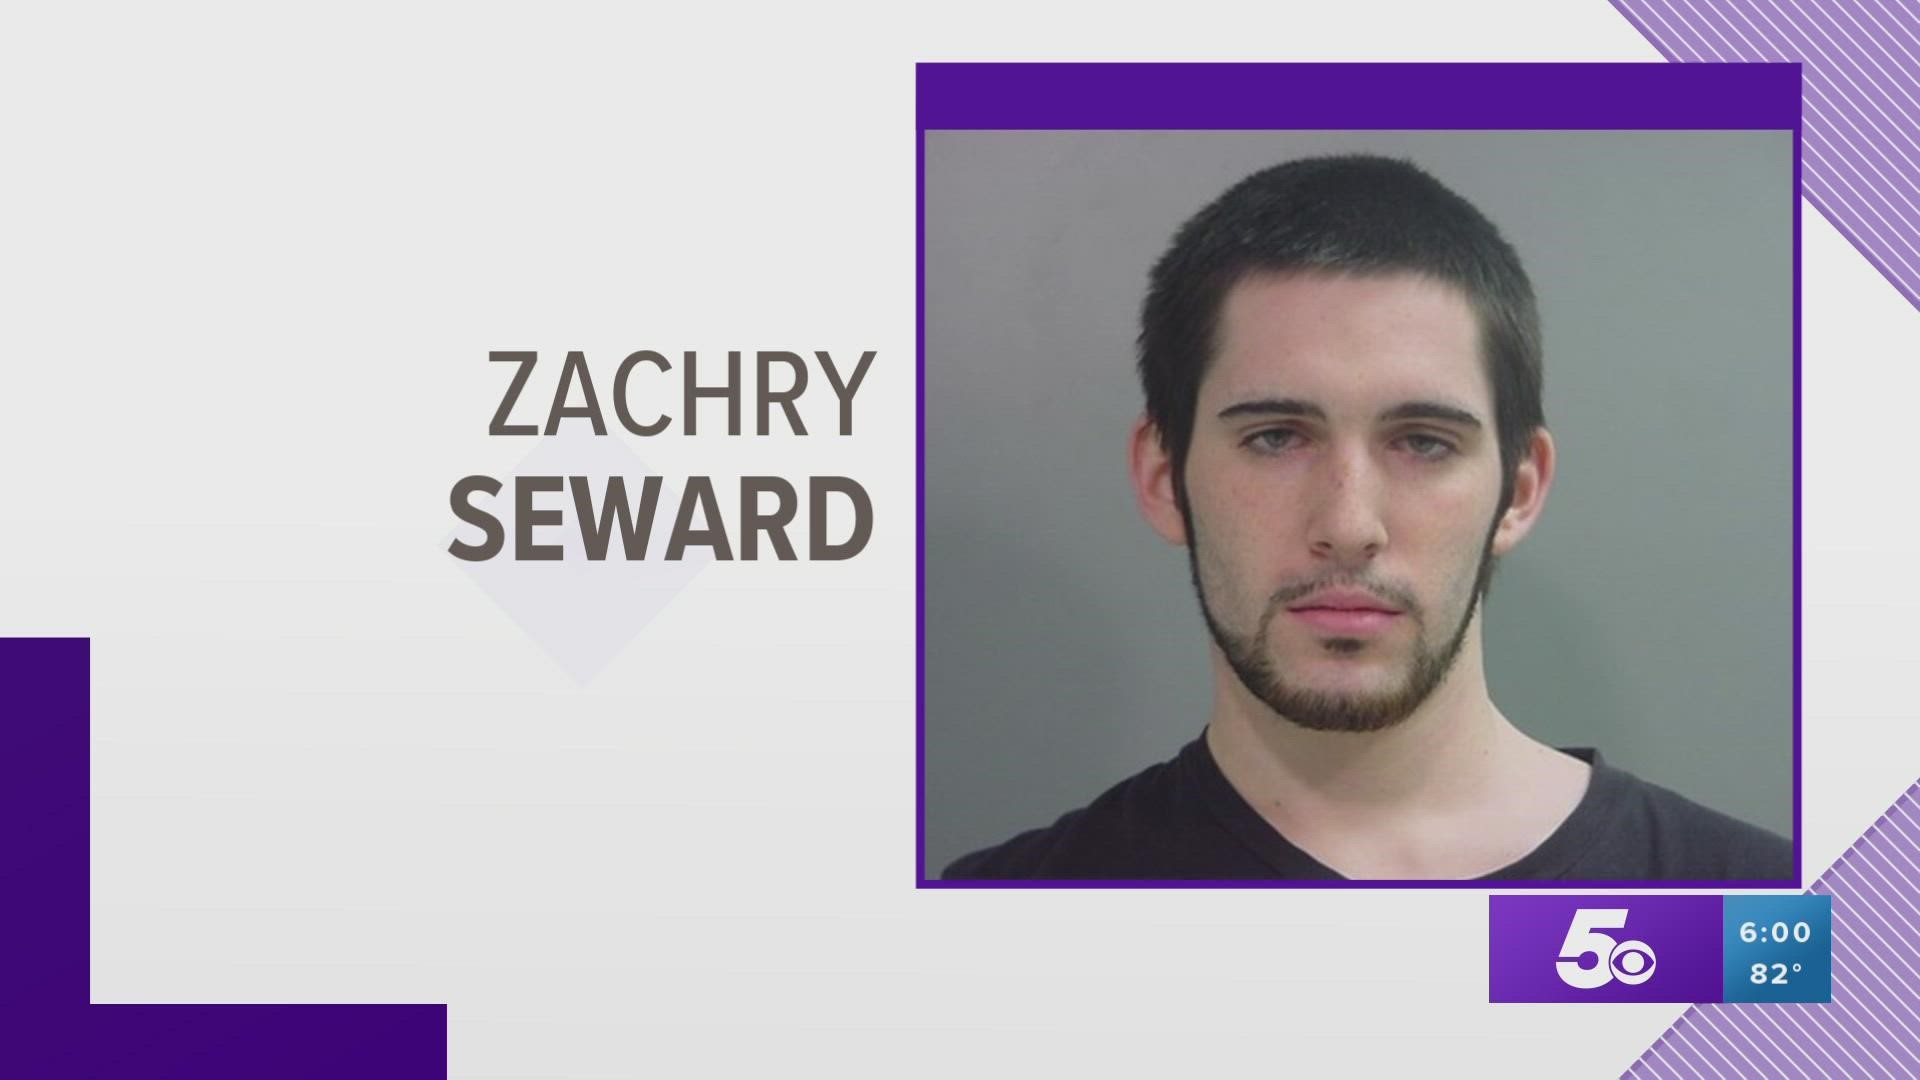 Zachry Seward is facing an attempted capital murder charge after stabbing his former probation officer multiple times.